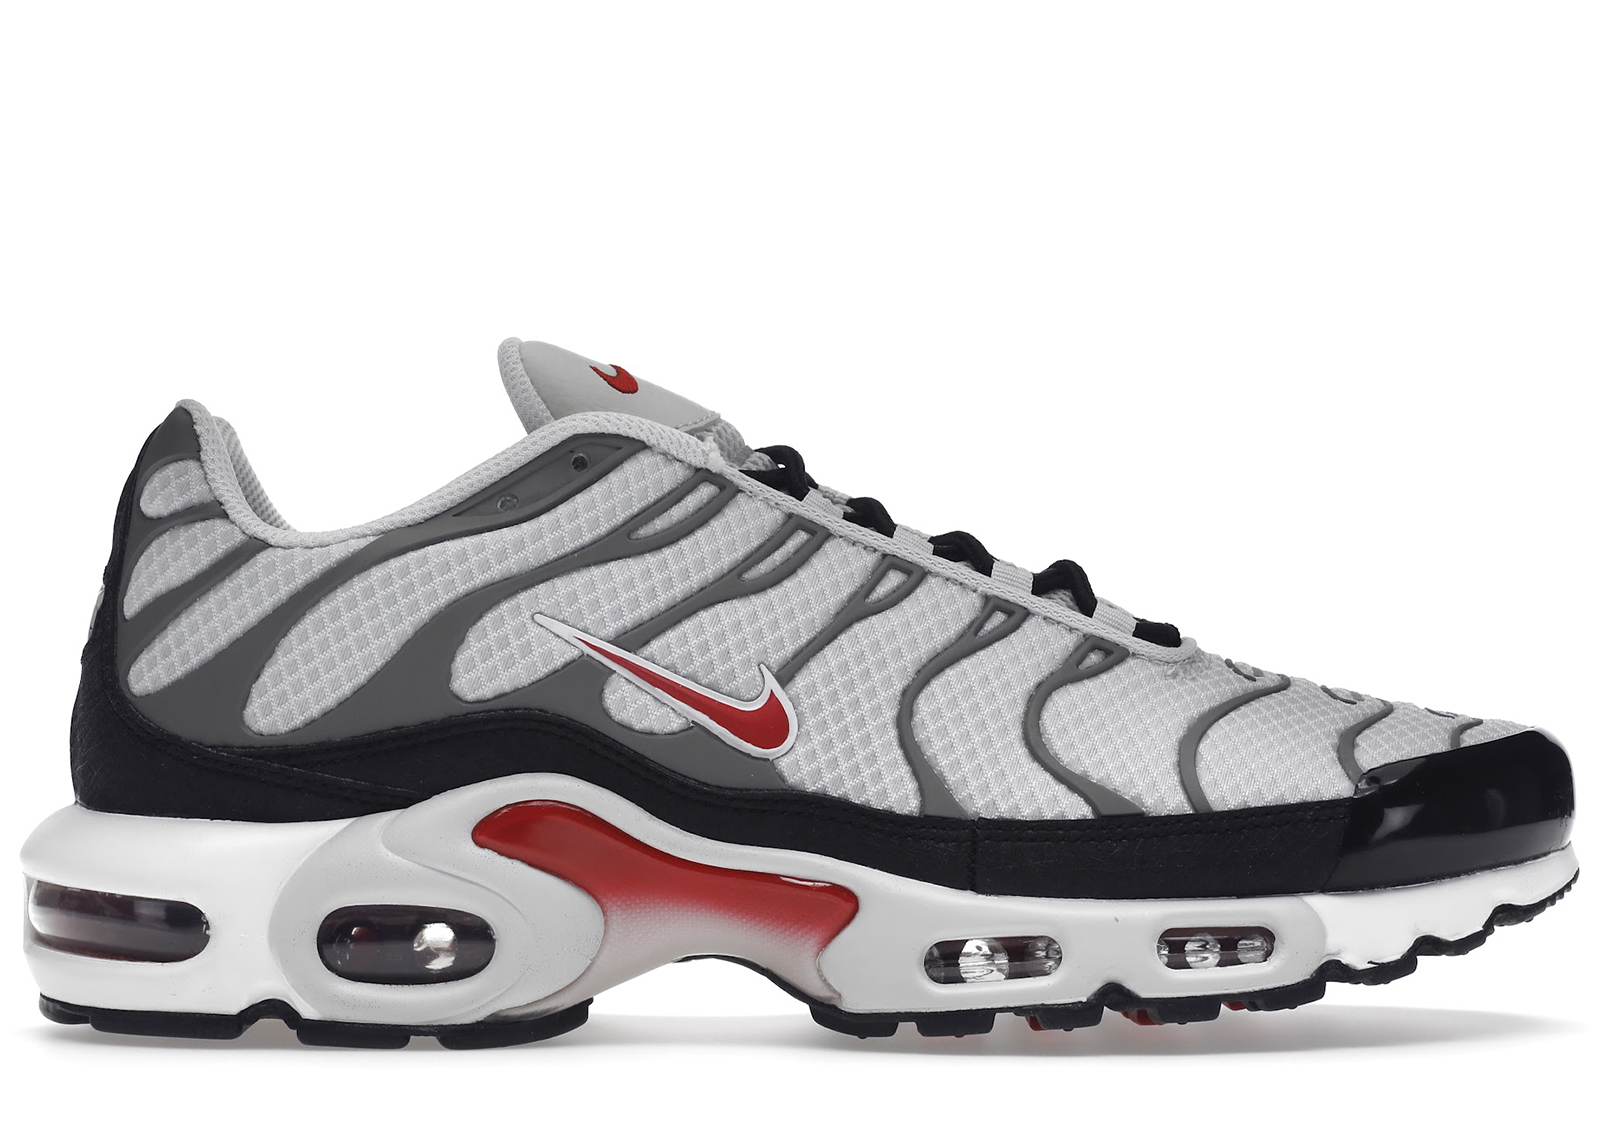 Buy Nike Air Max Plus Size 13 Shoes & New Sneakers - StockX